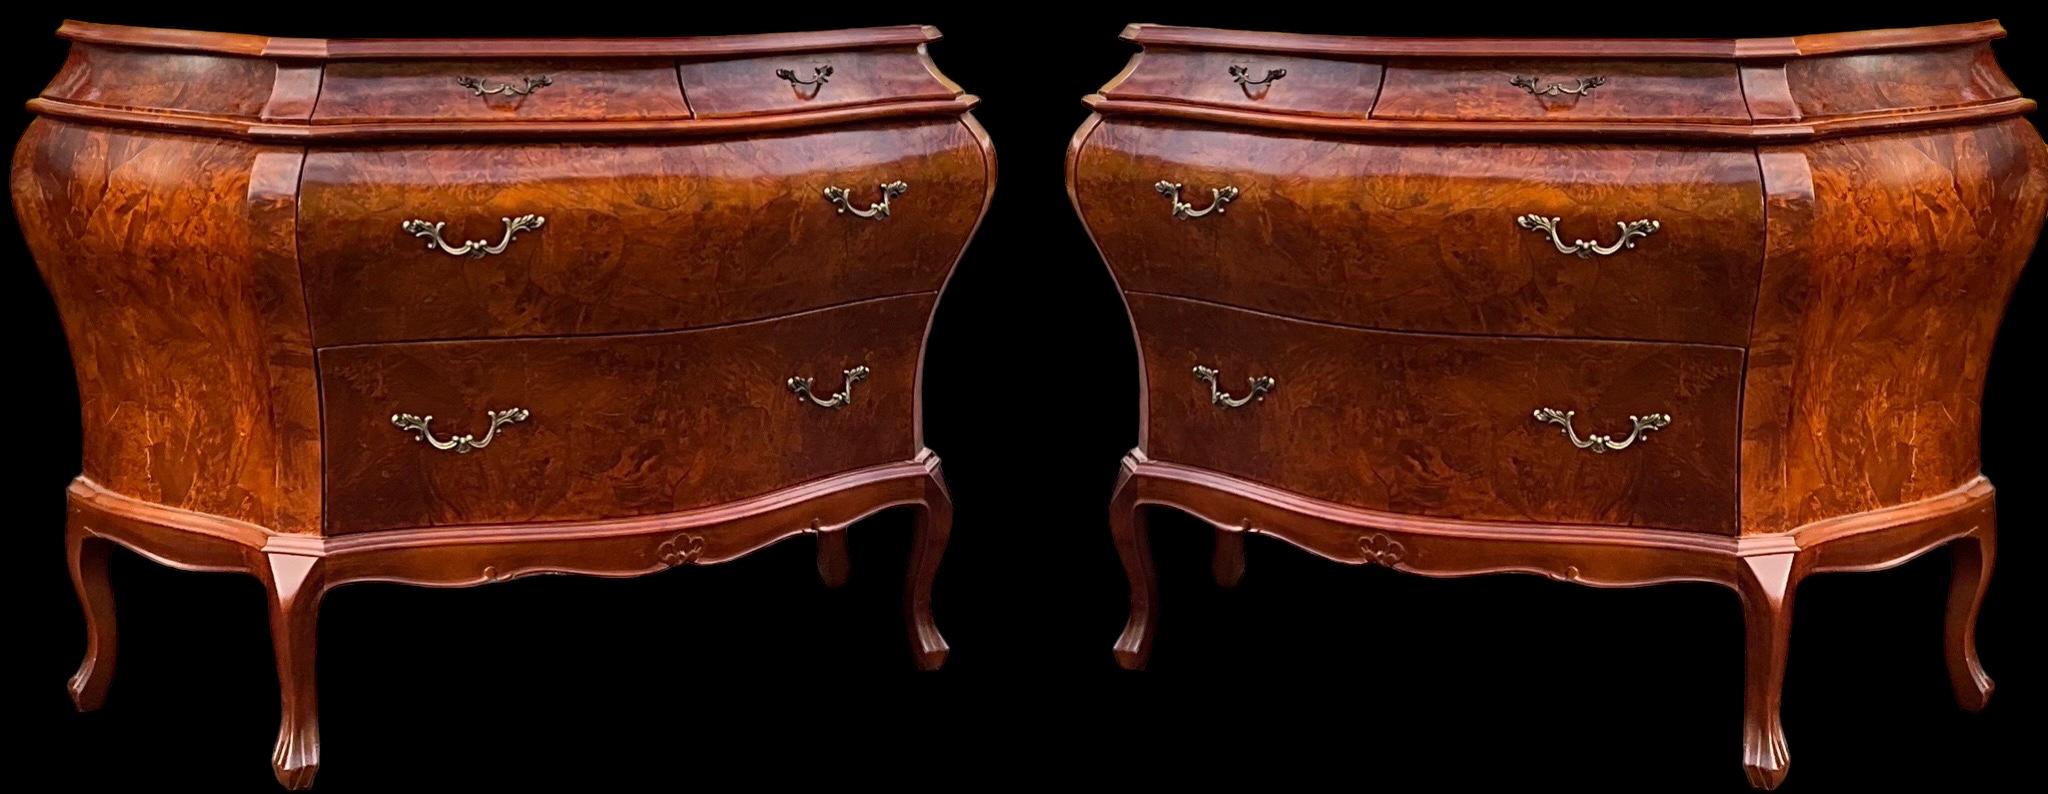 1970 French Style Italian Burlwood And Brass Commodes / Chest Of Drawers - Pair en vente 5